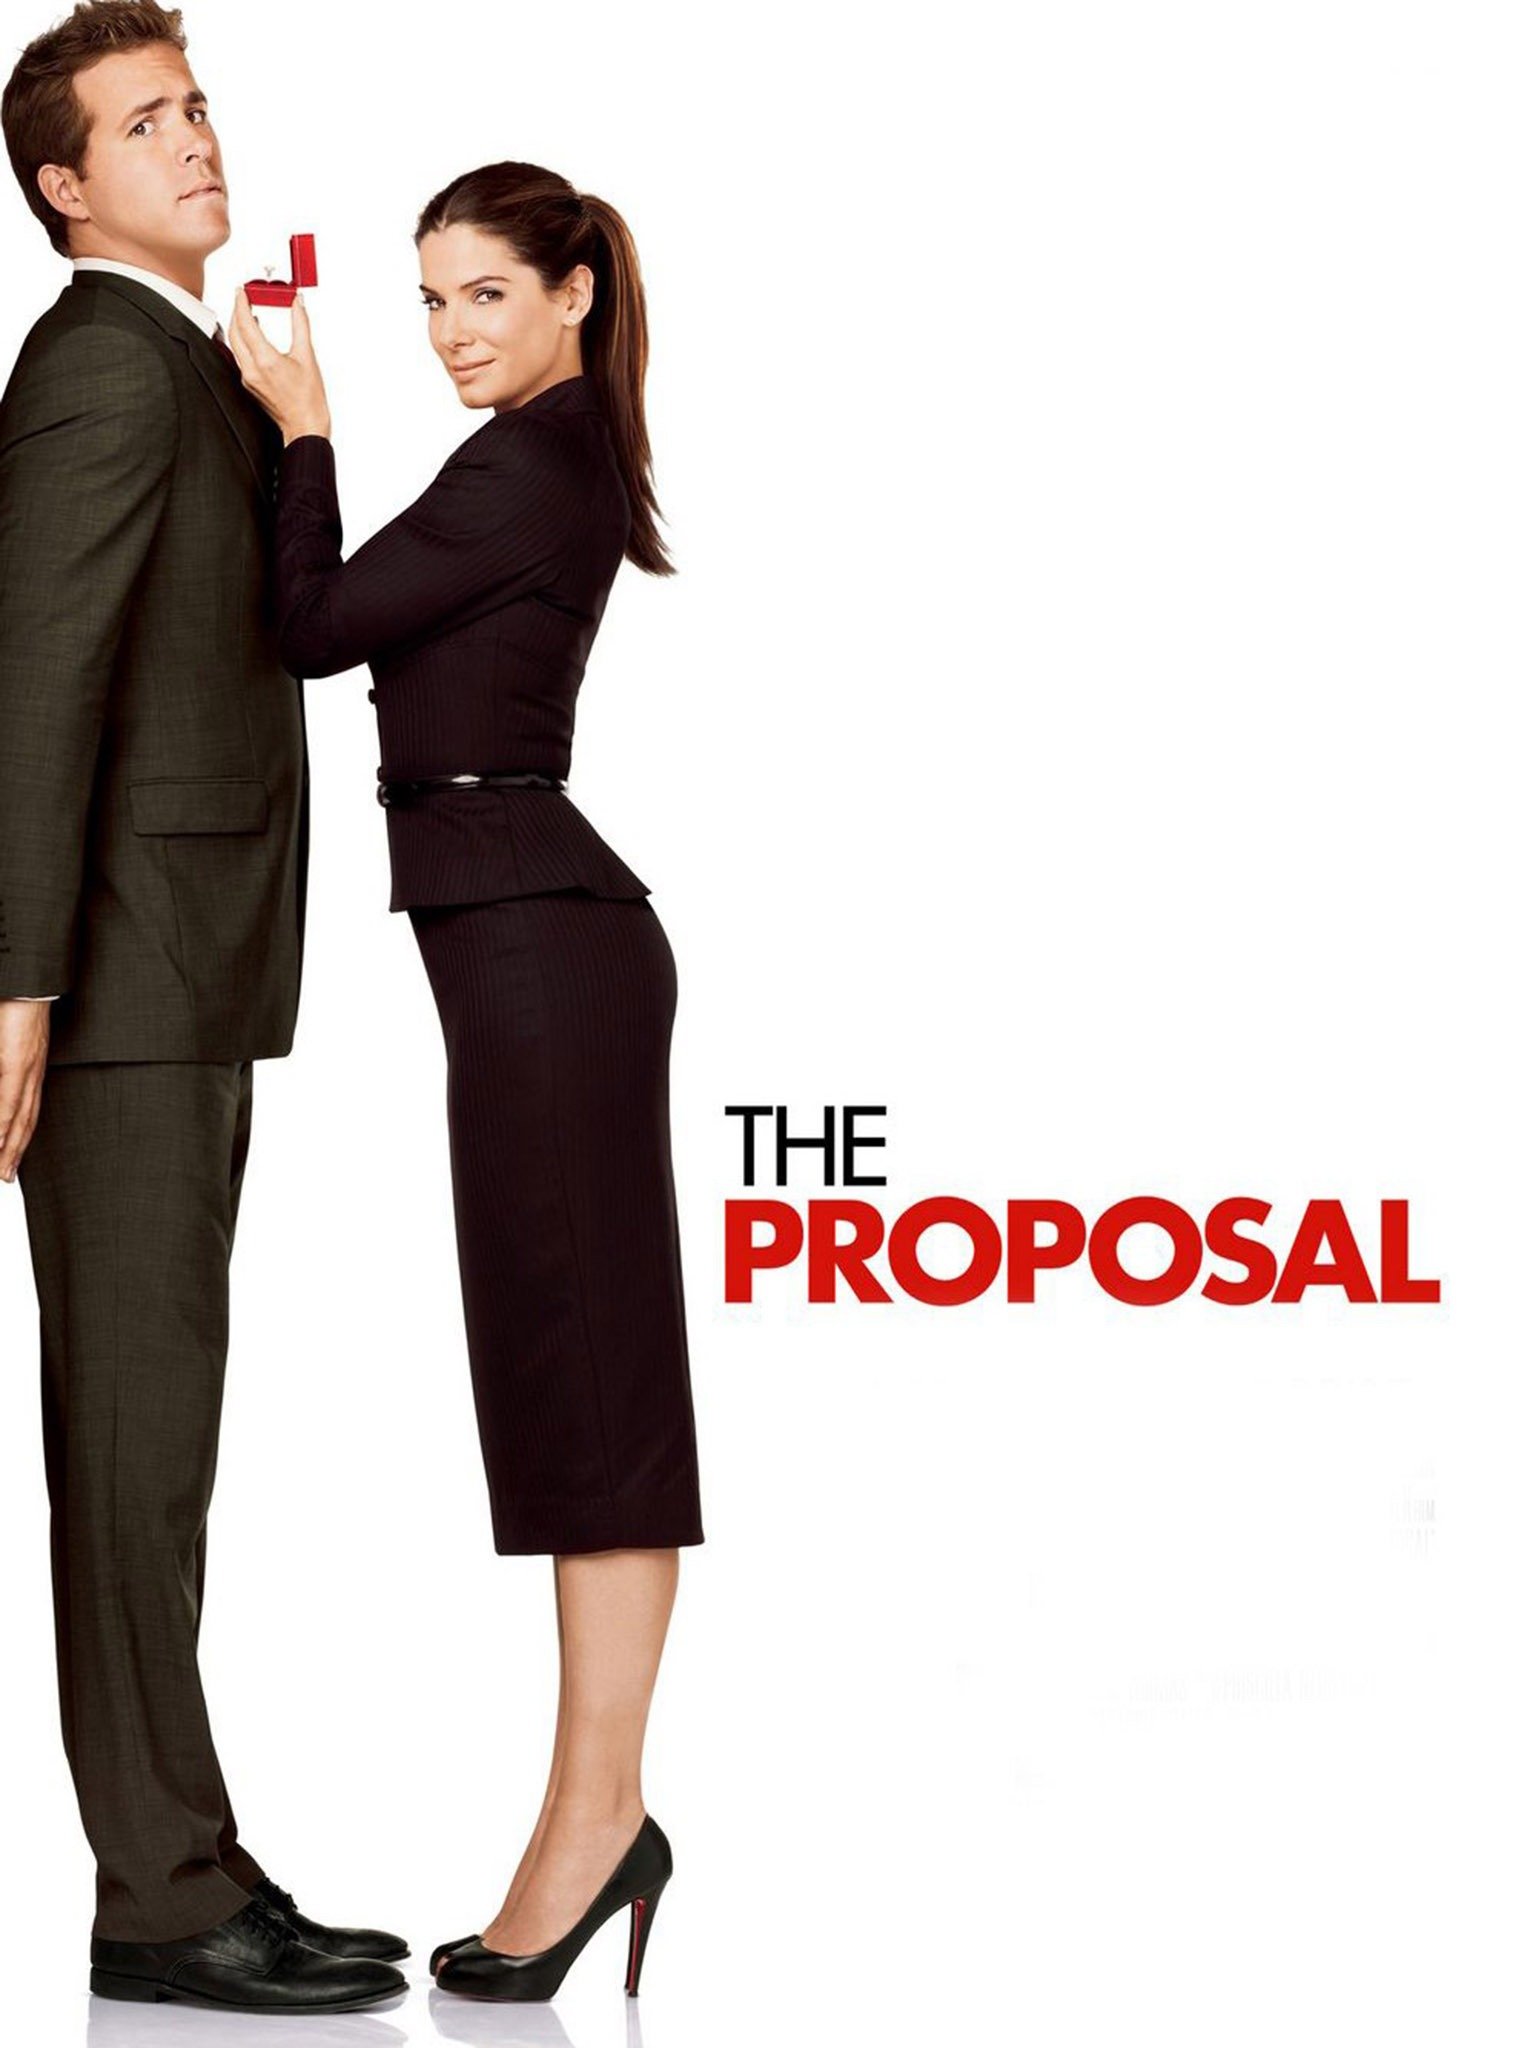 a business proposal movie